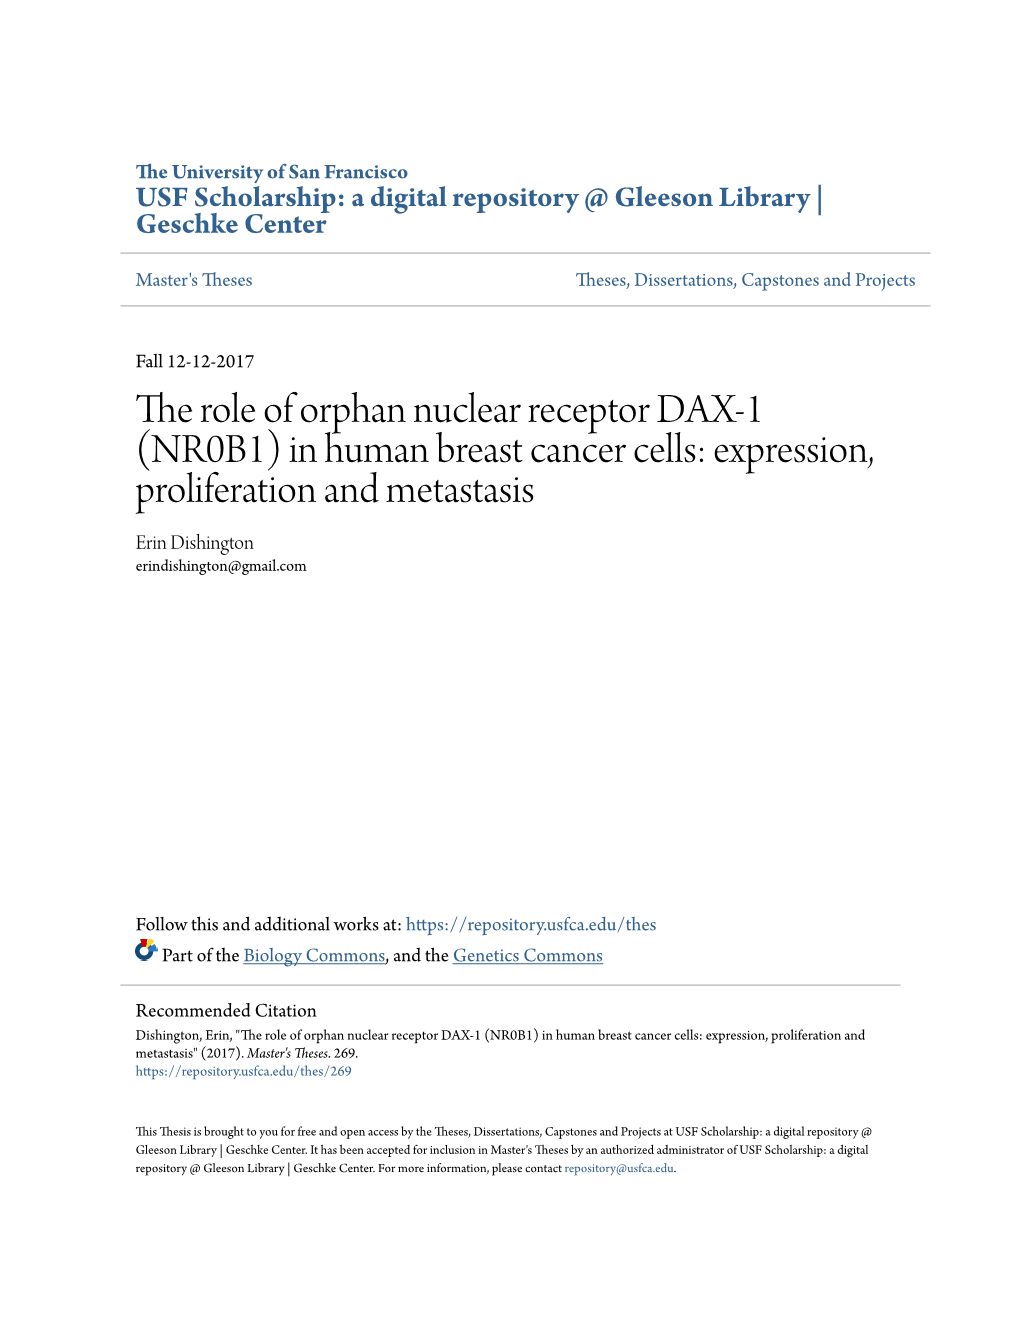 The Role of Orphan Nuclear Receptor DAX-1 (NR0B1)